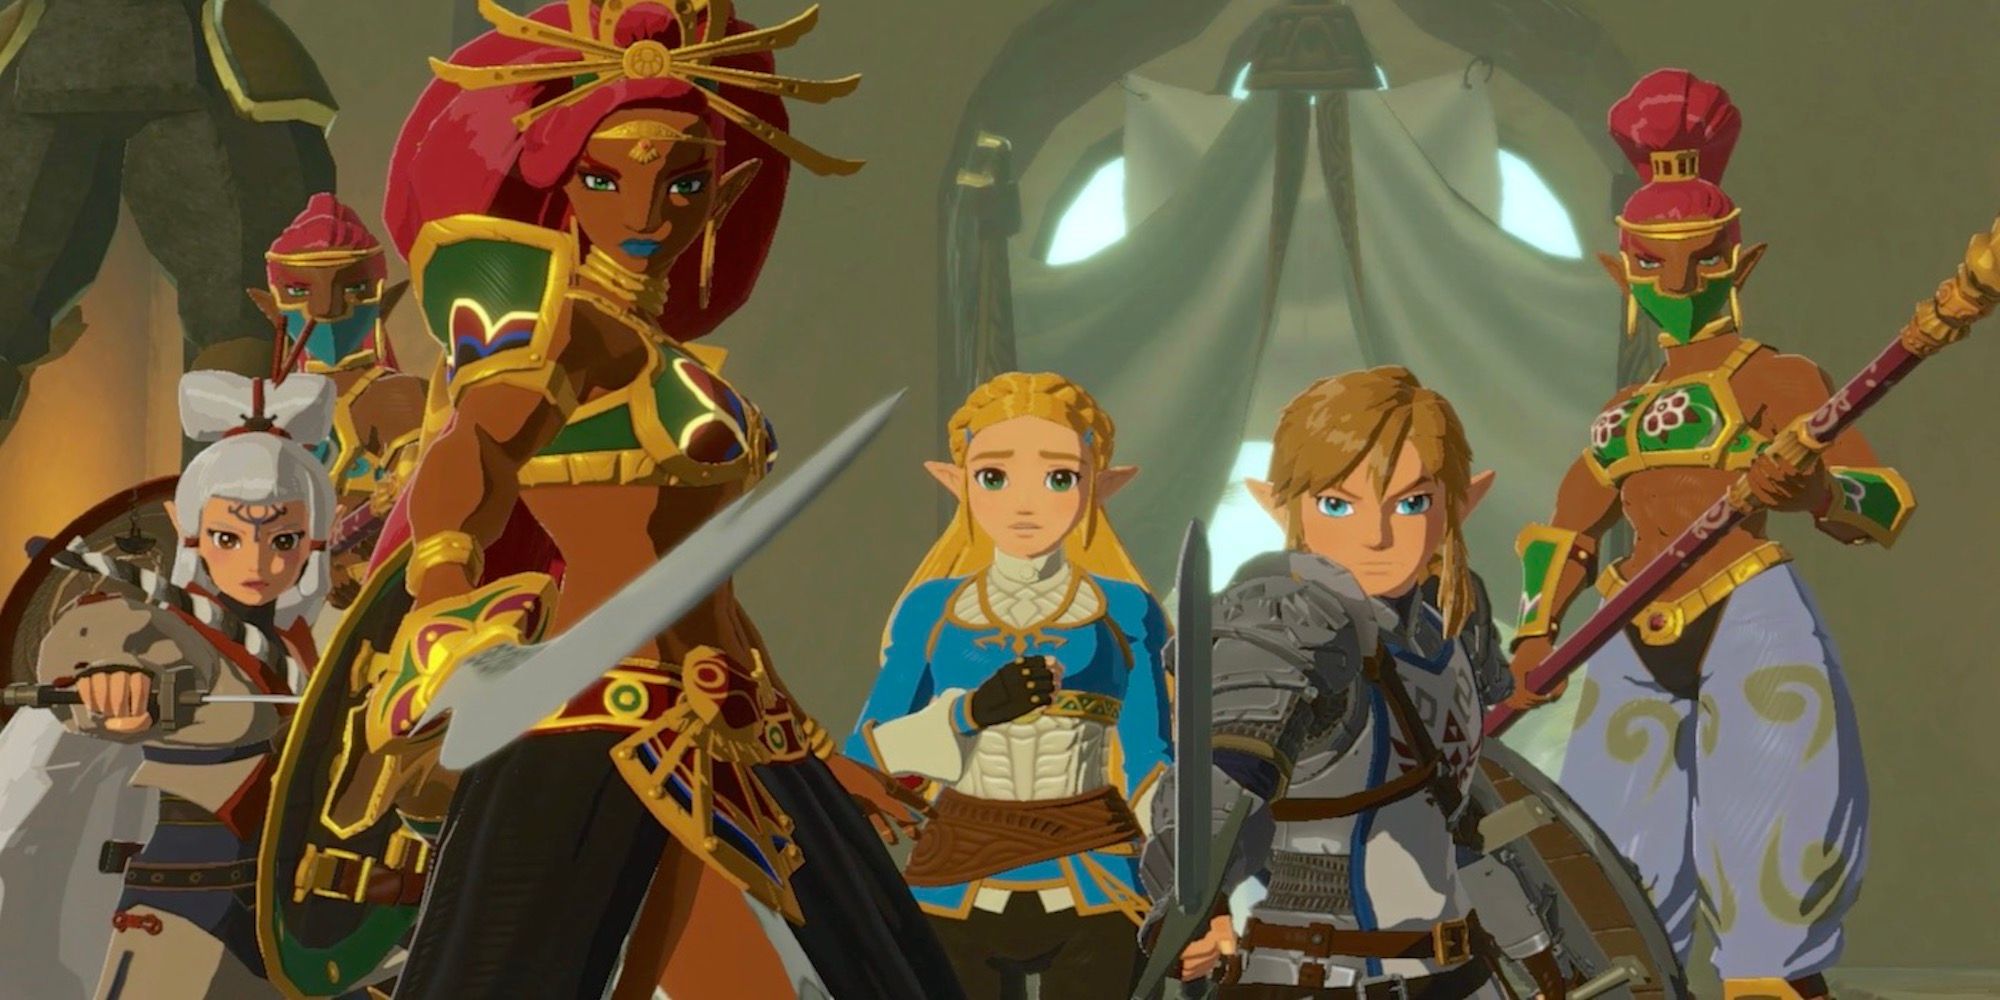 A cutscene featuring characters in Hyrule Warriors Age of Calamity